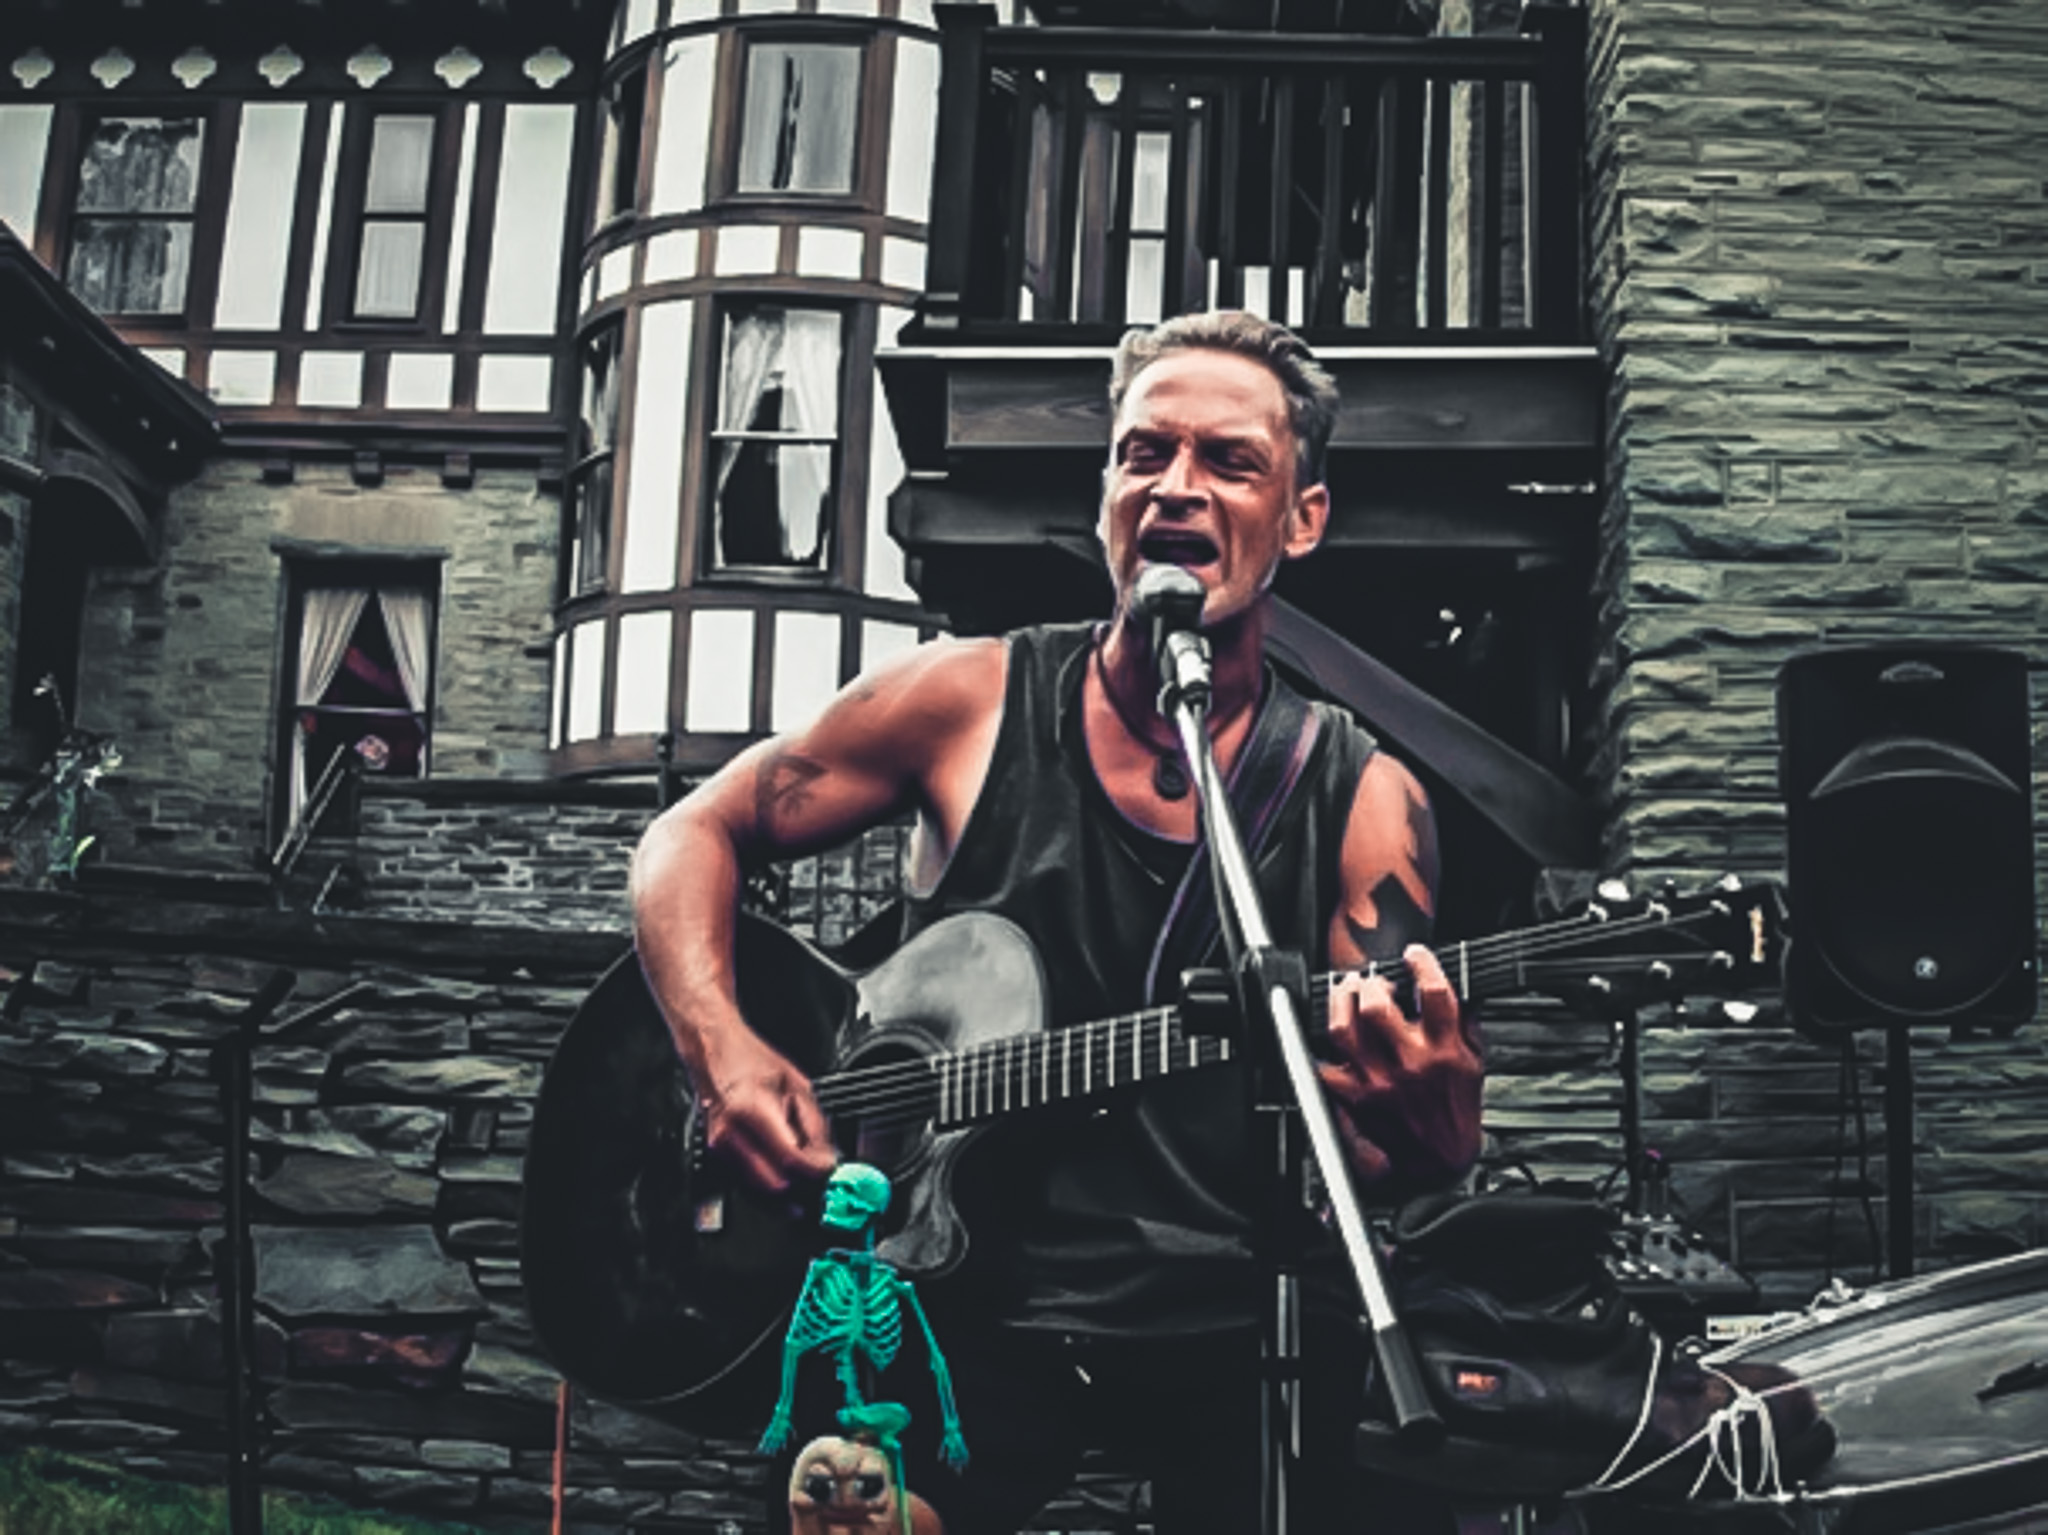 A white man sings into a mic in front of a stone building. He is playing a guitar and a small, bright green skeleton is in front of him